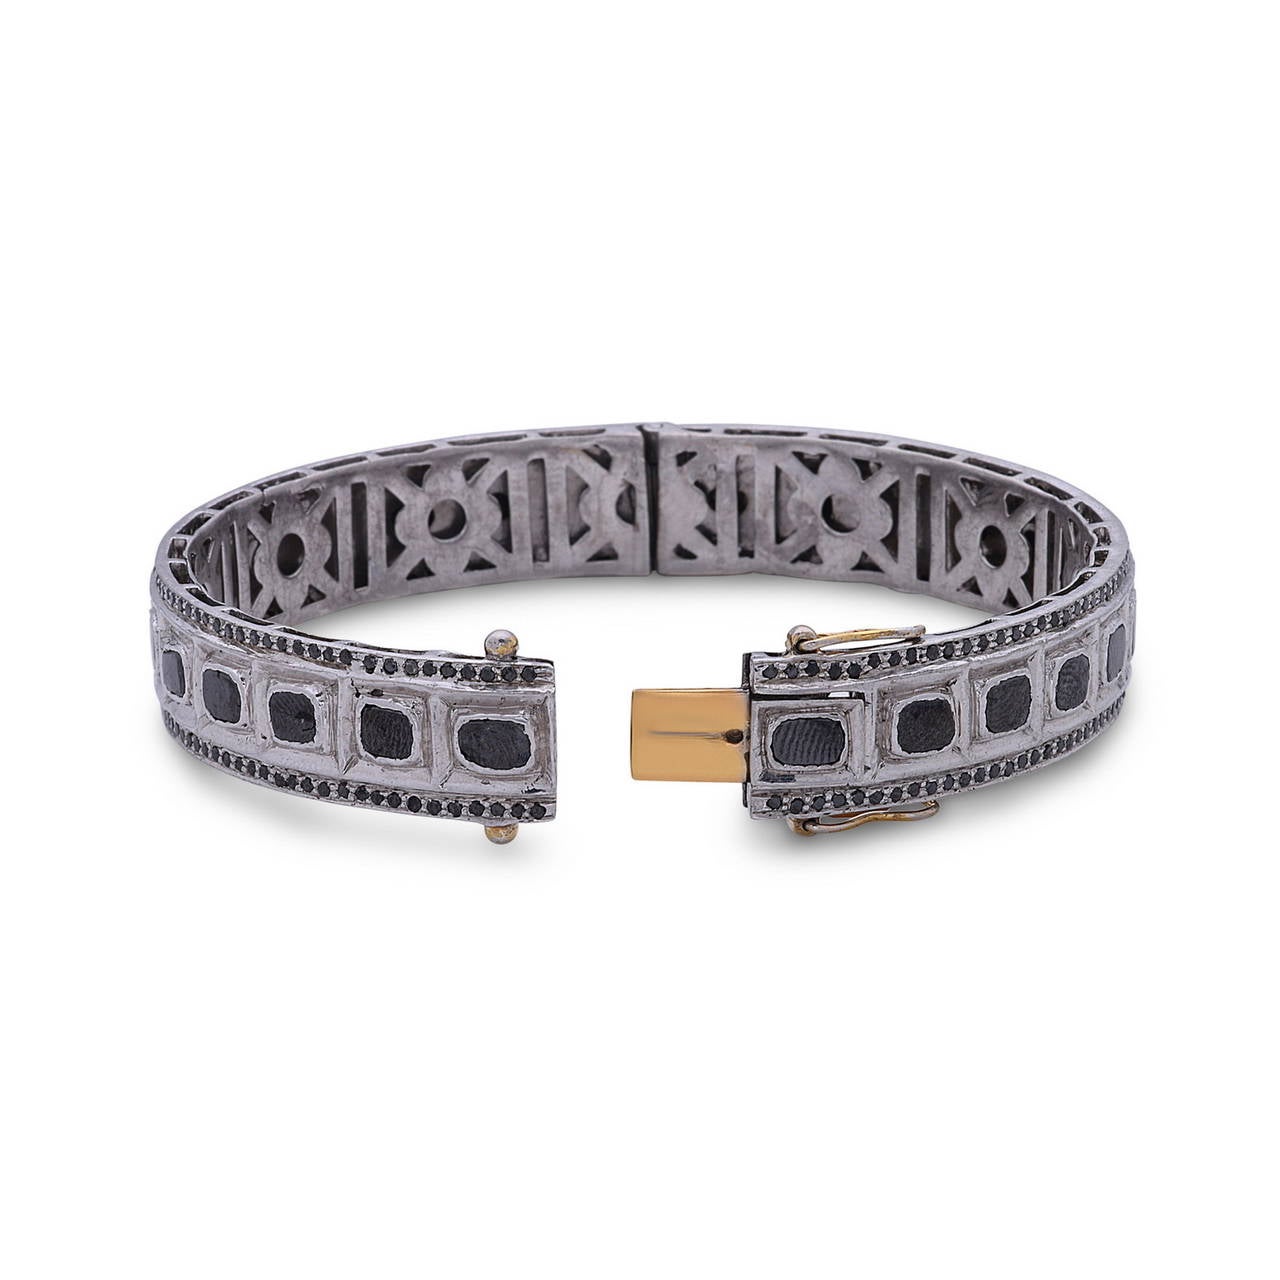 Handmade in India with 14K Gold & Silver this beautiful bangle is openable with 2 safety clasp. This bangle has slice & full cut black diamond. There is total of 7.92cts. Can be worn day to night.